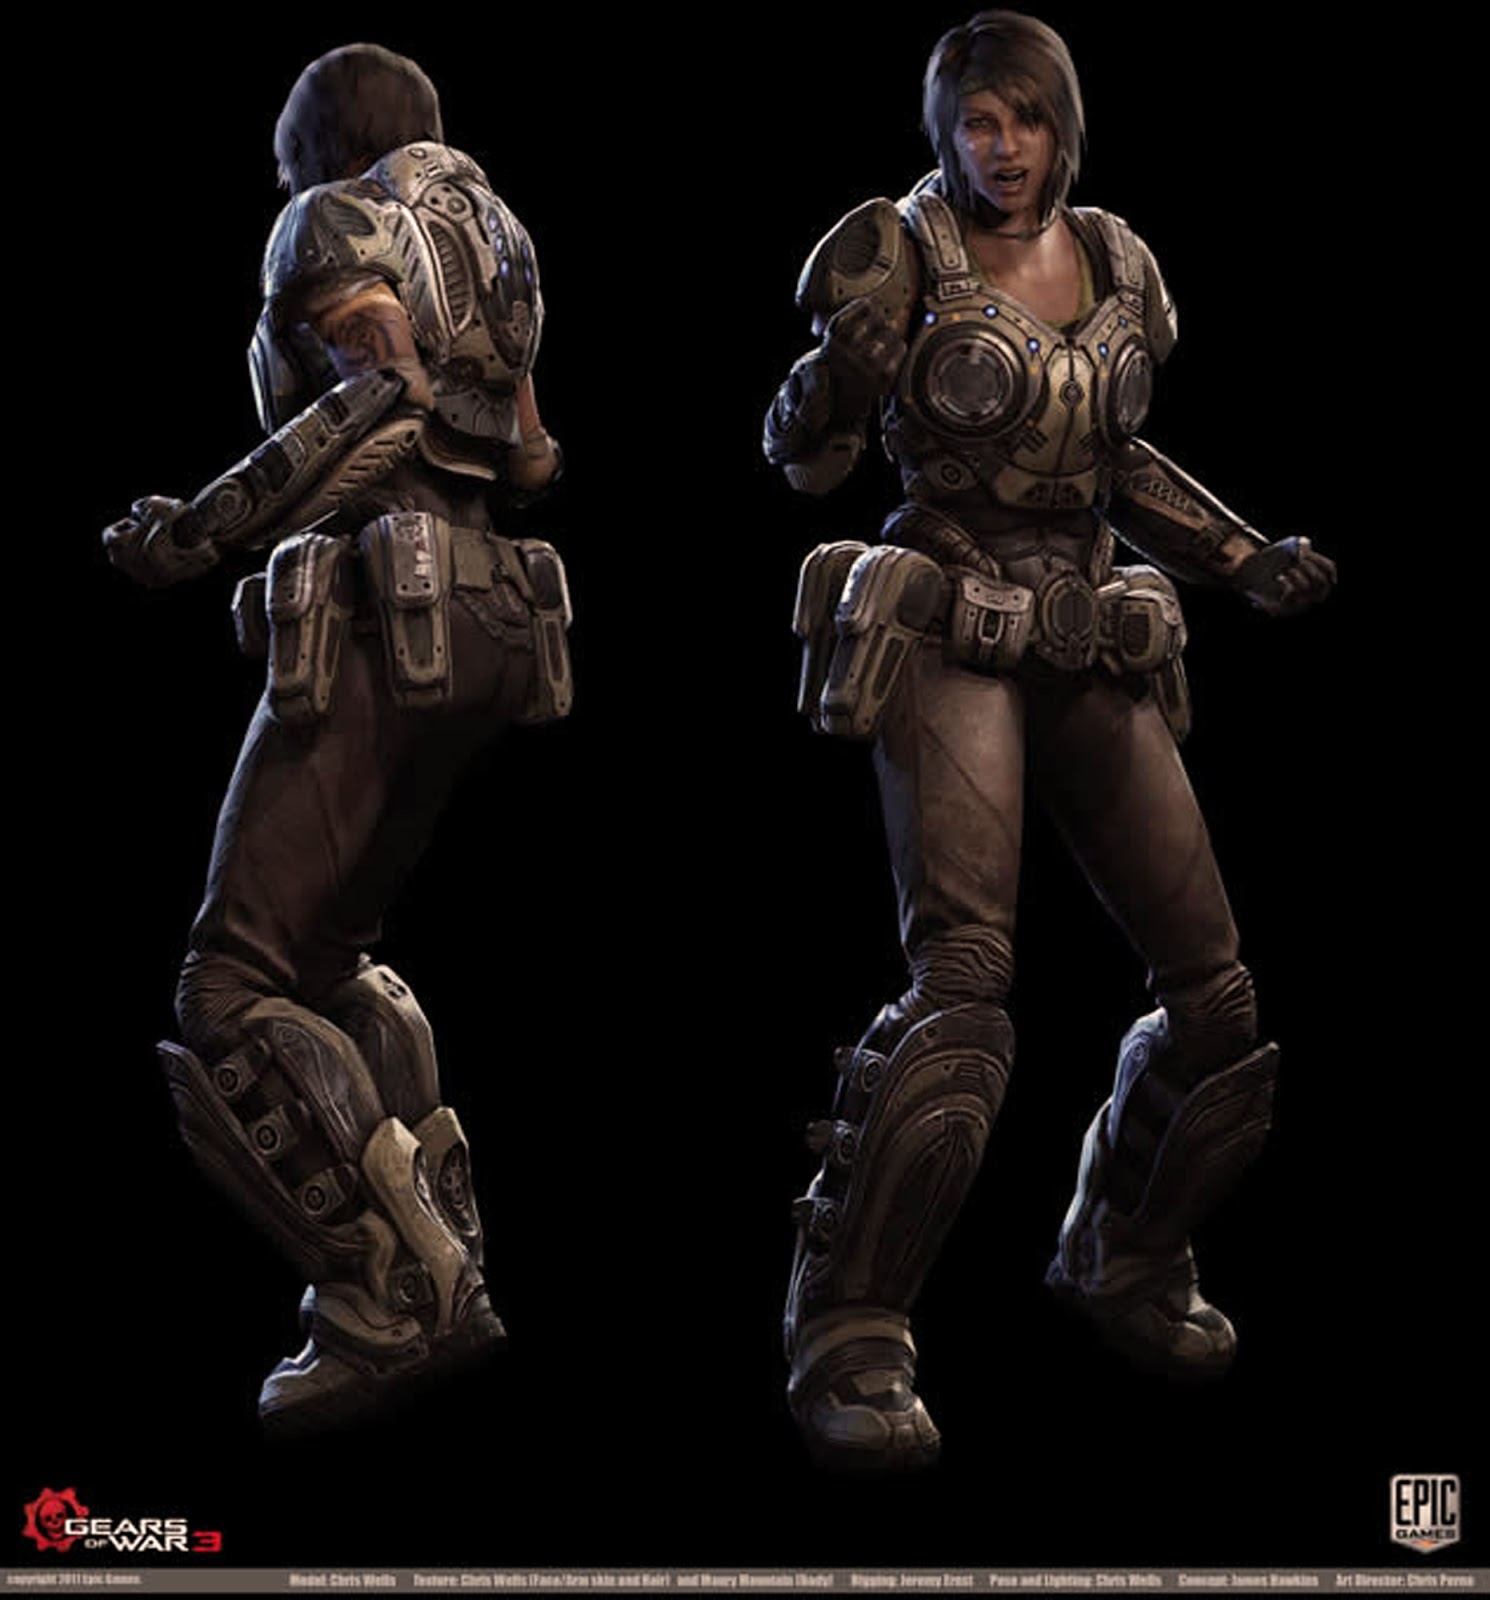 GEARS OF WAR JUDGMENT - GAME CHARACTERS, WALLPAPERS, SCI FI ARMOR, 3D ...